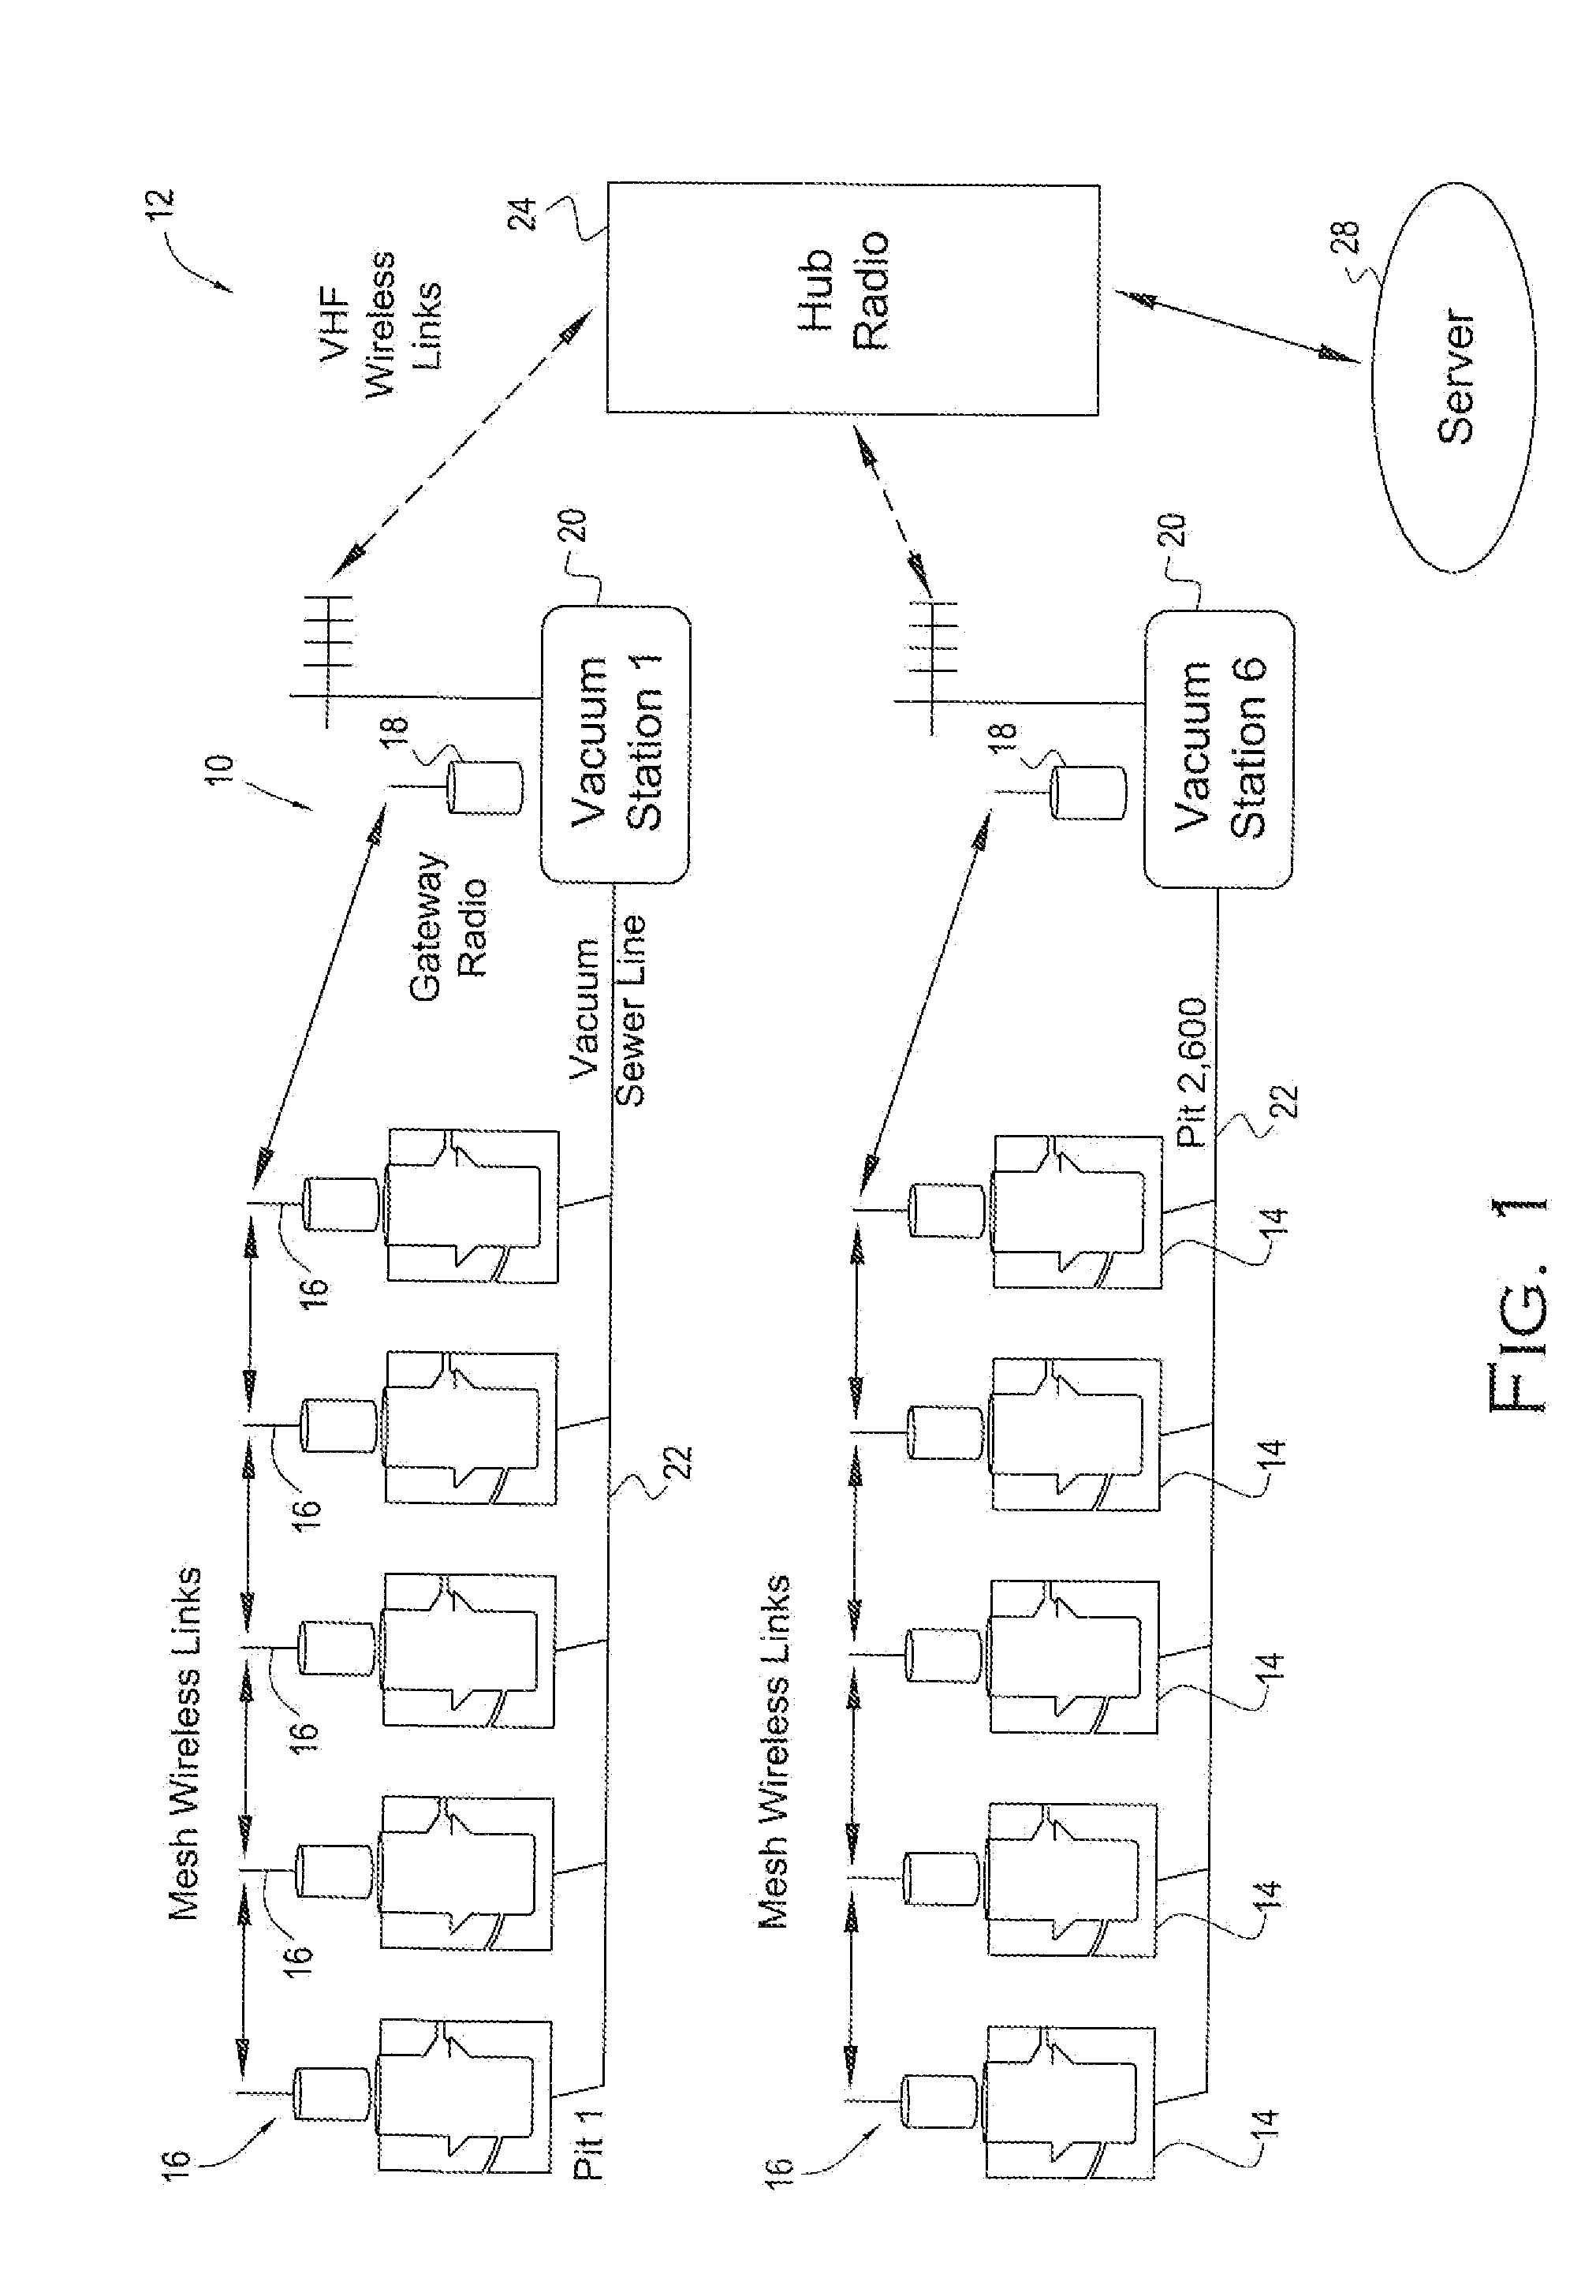 Valve malfunctioning detection system for a vacuum sewer and associated methods